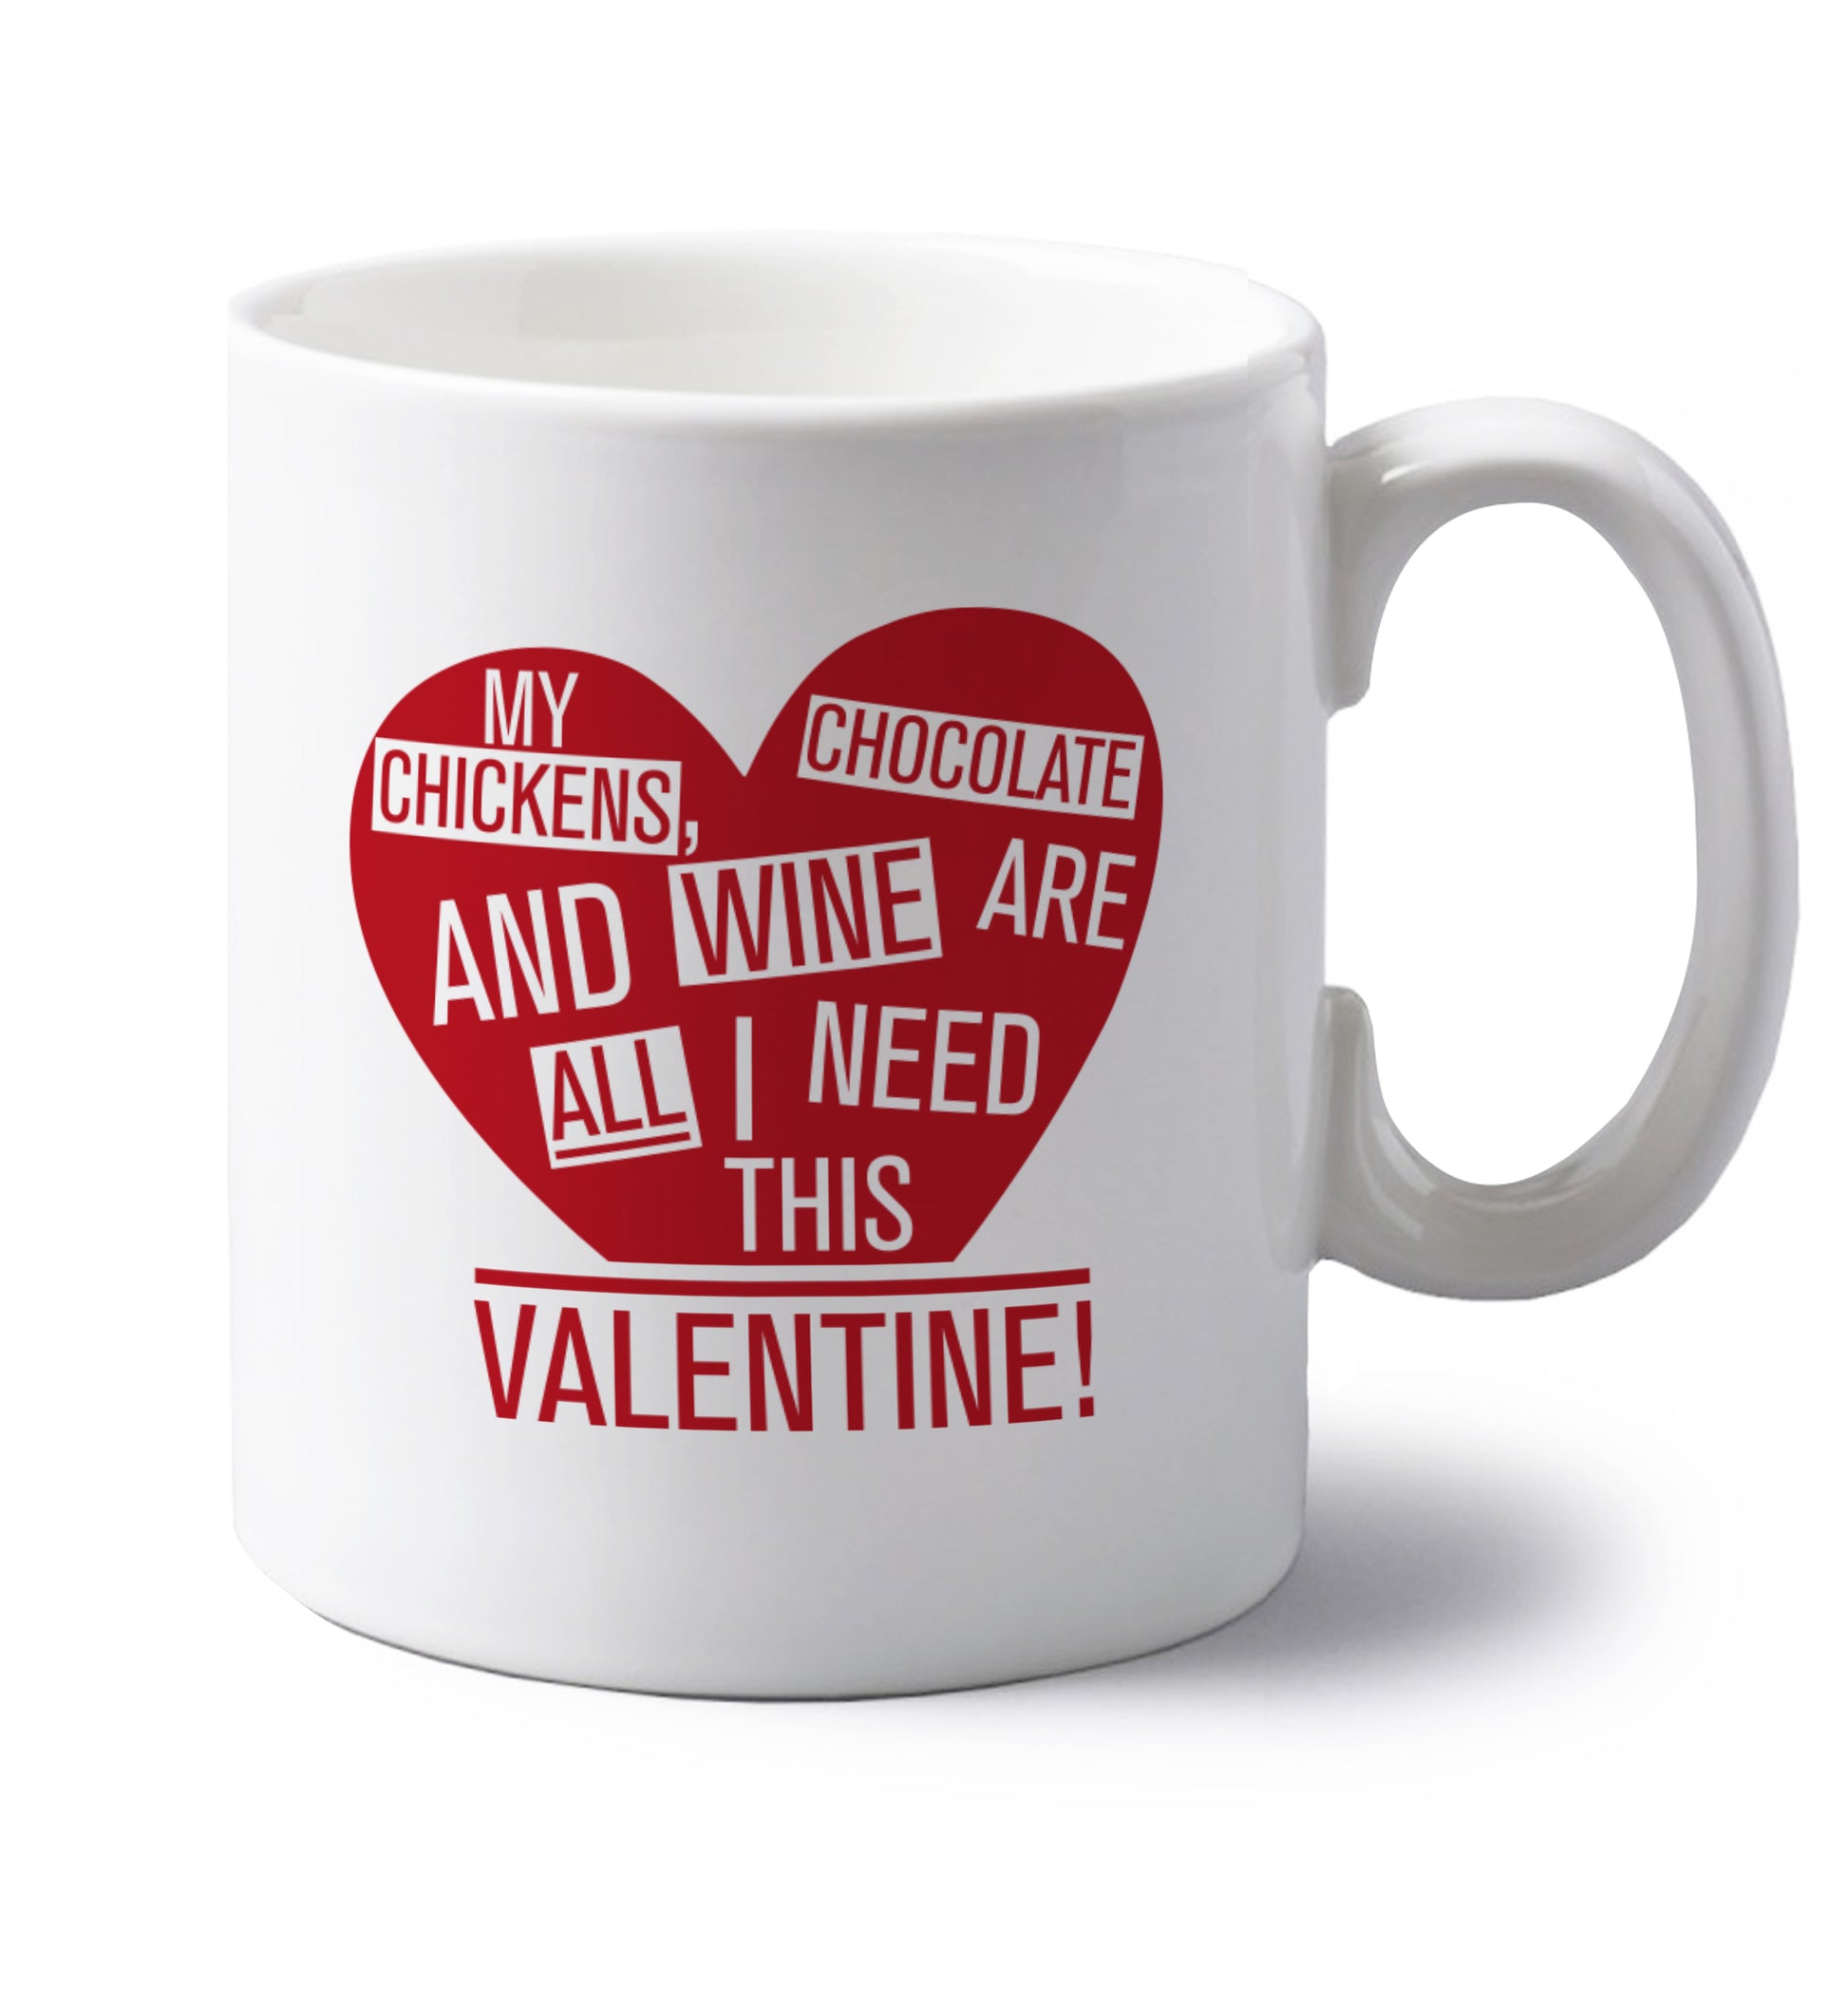 My chickens, chocolate and wine are all I need this valentine! left handed white ceramic mug 